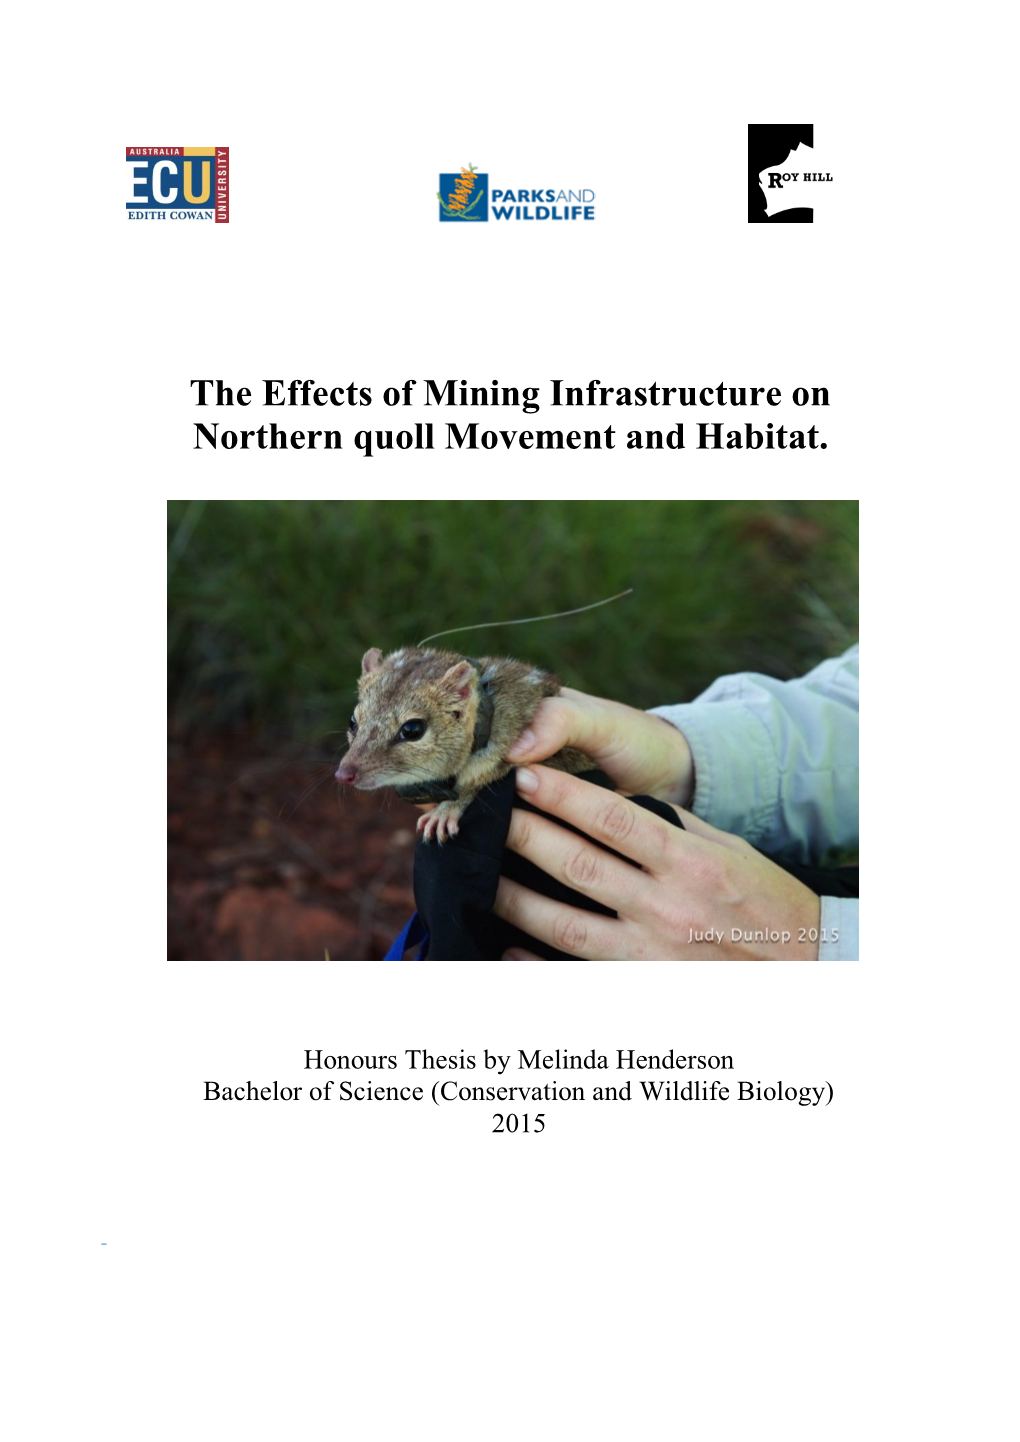 The Effects of Mining Infrastructure on Northern Quoll Movement and Habitat